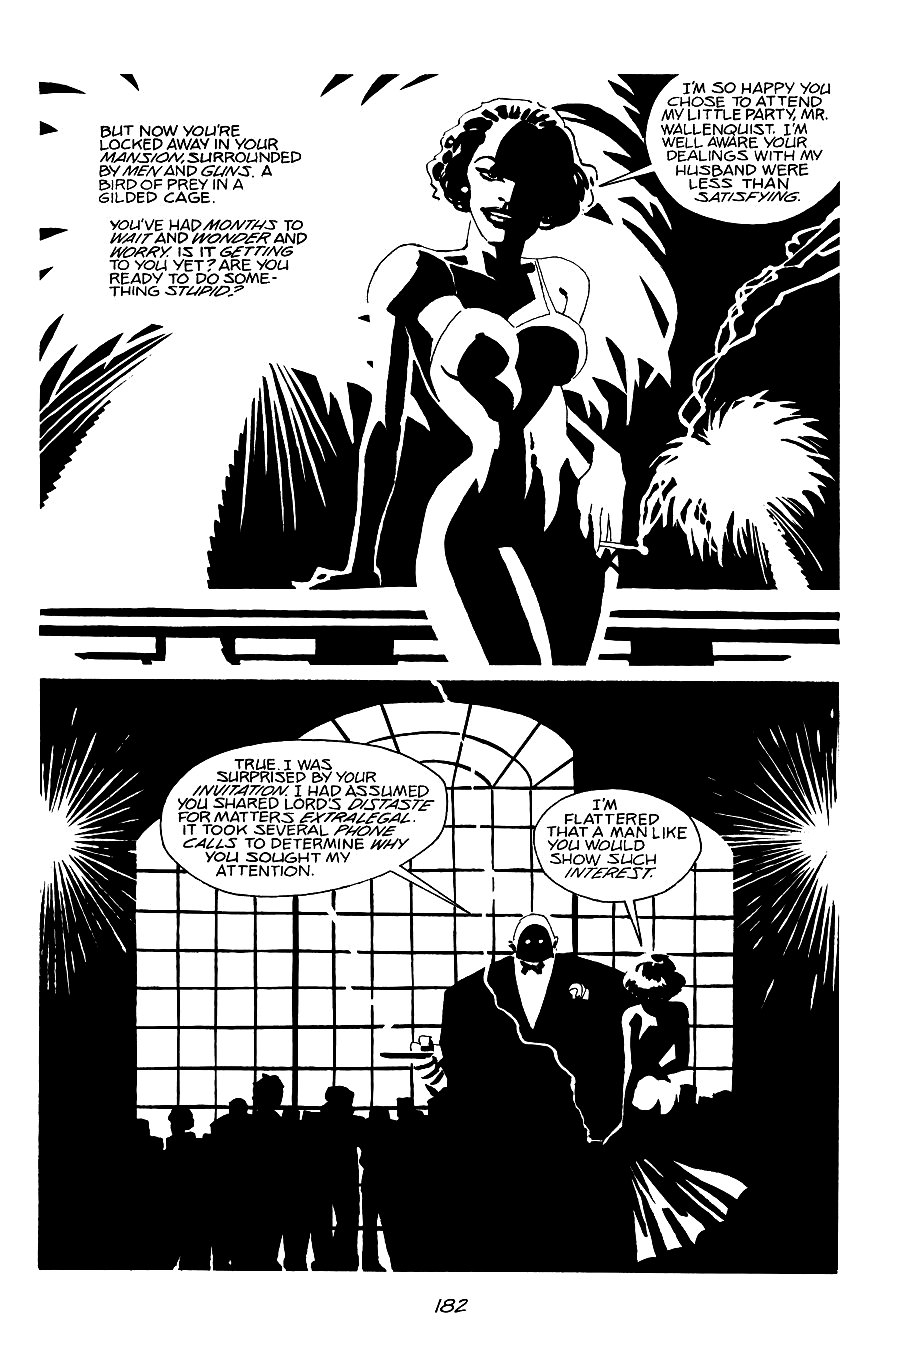 page 182 of sin city 2 the hard goodbye